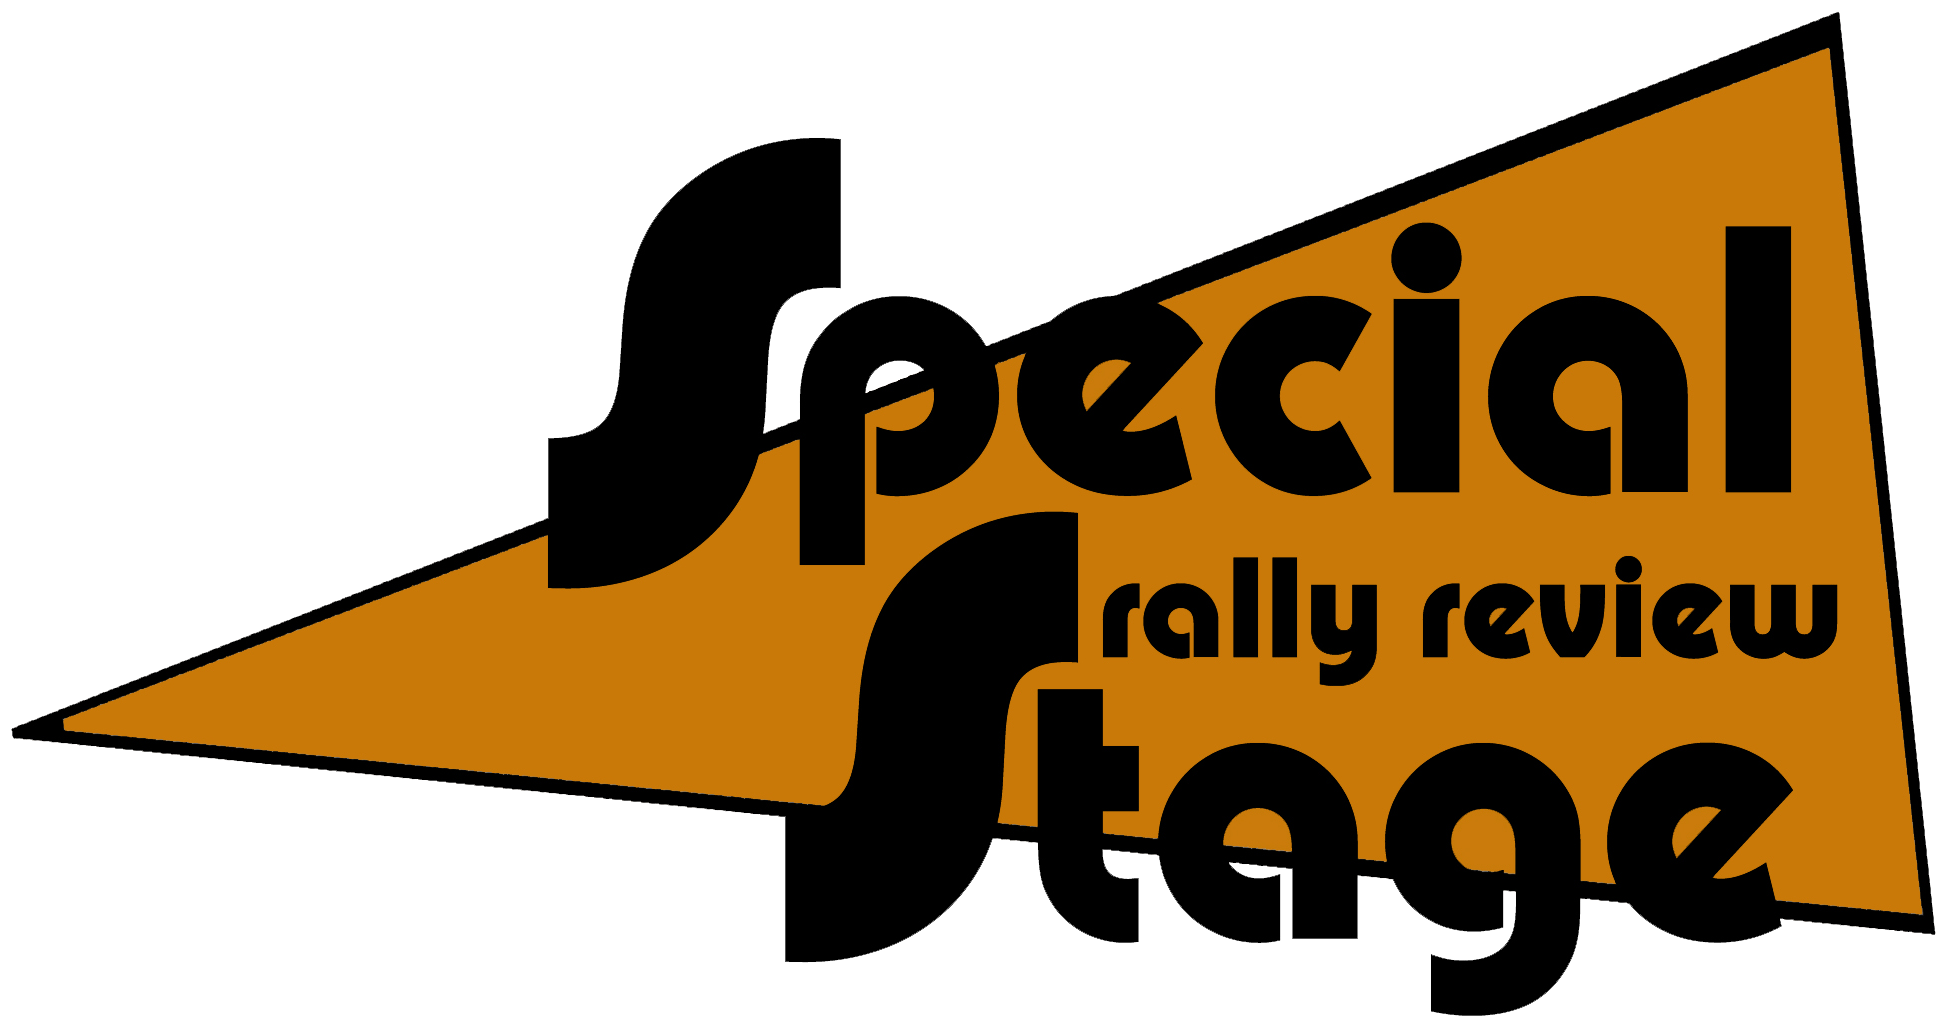 Special Stage Rally Review - Special Stage (2358x1326)